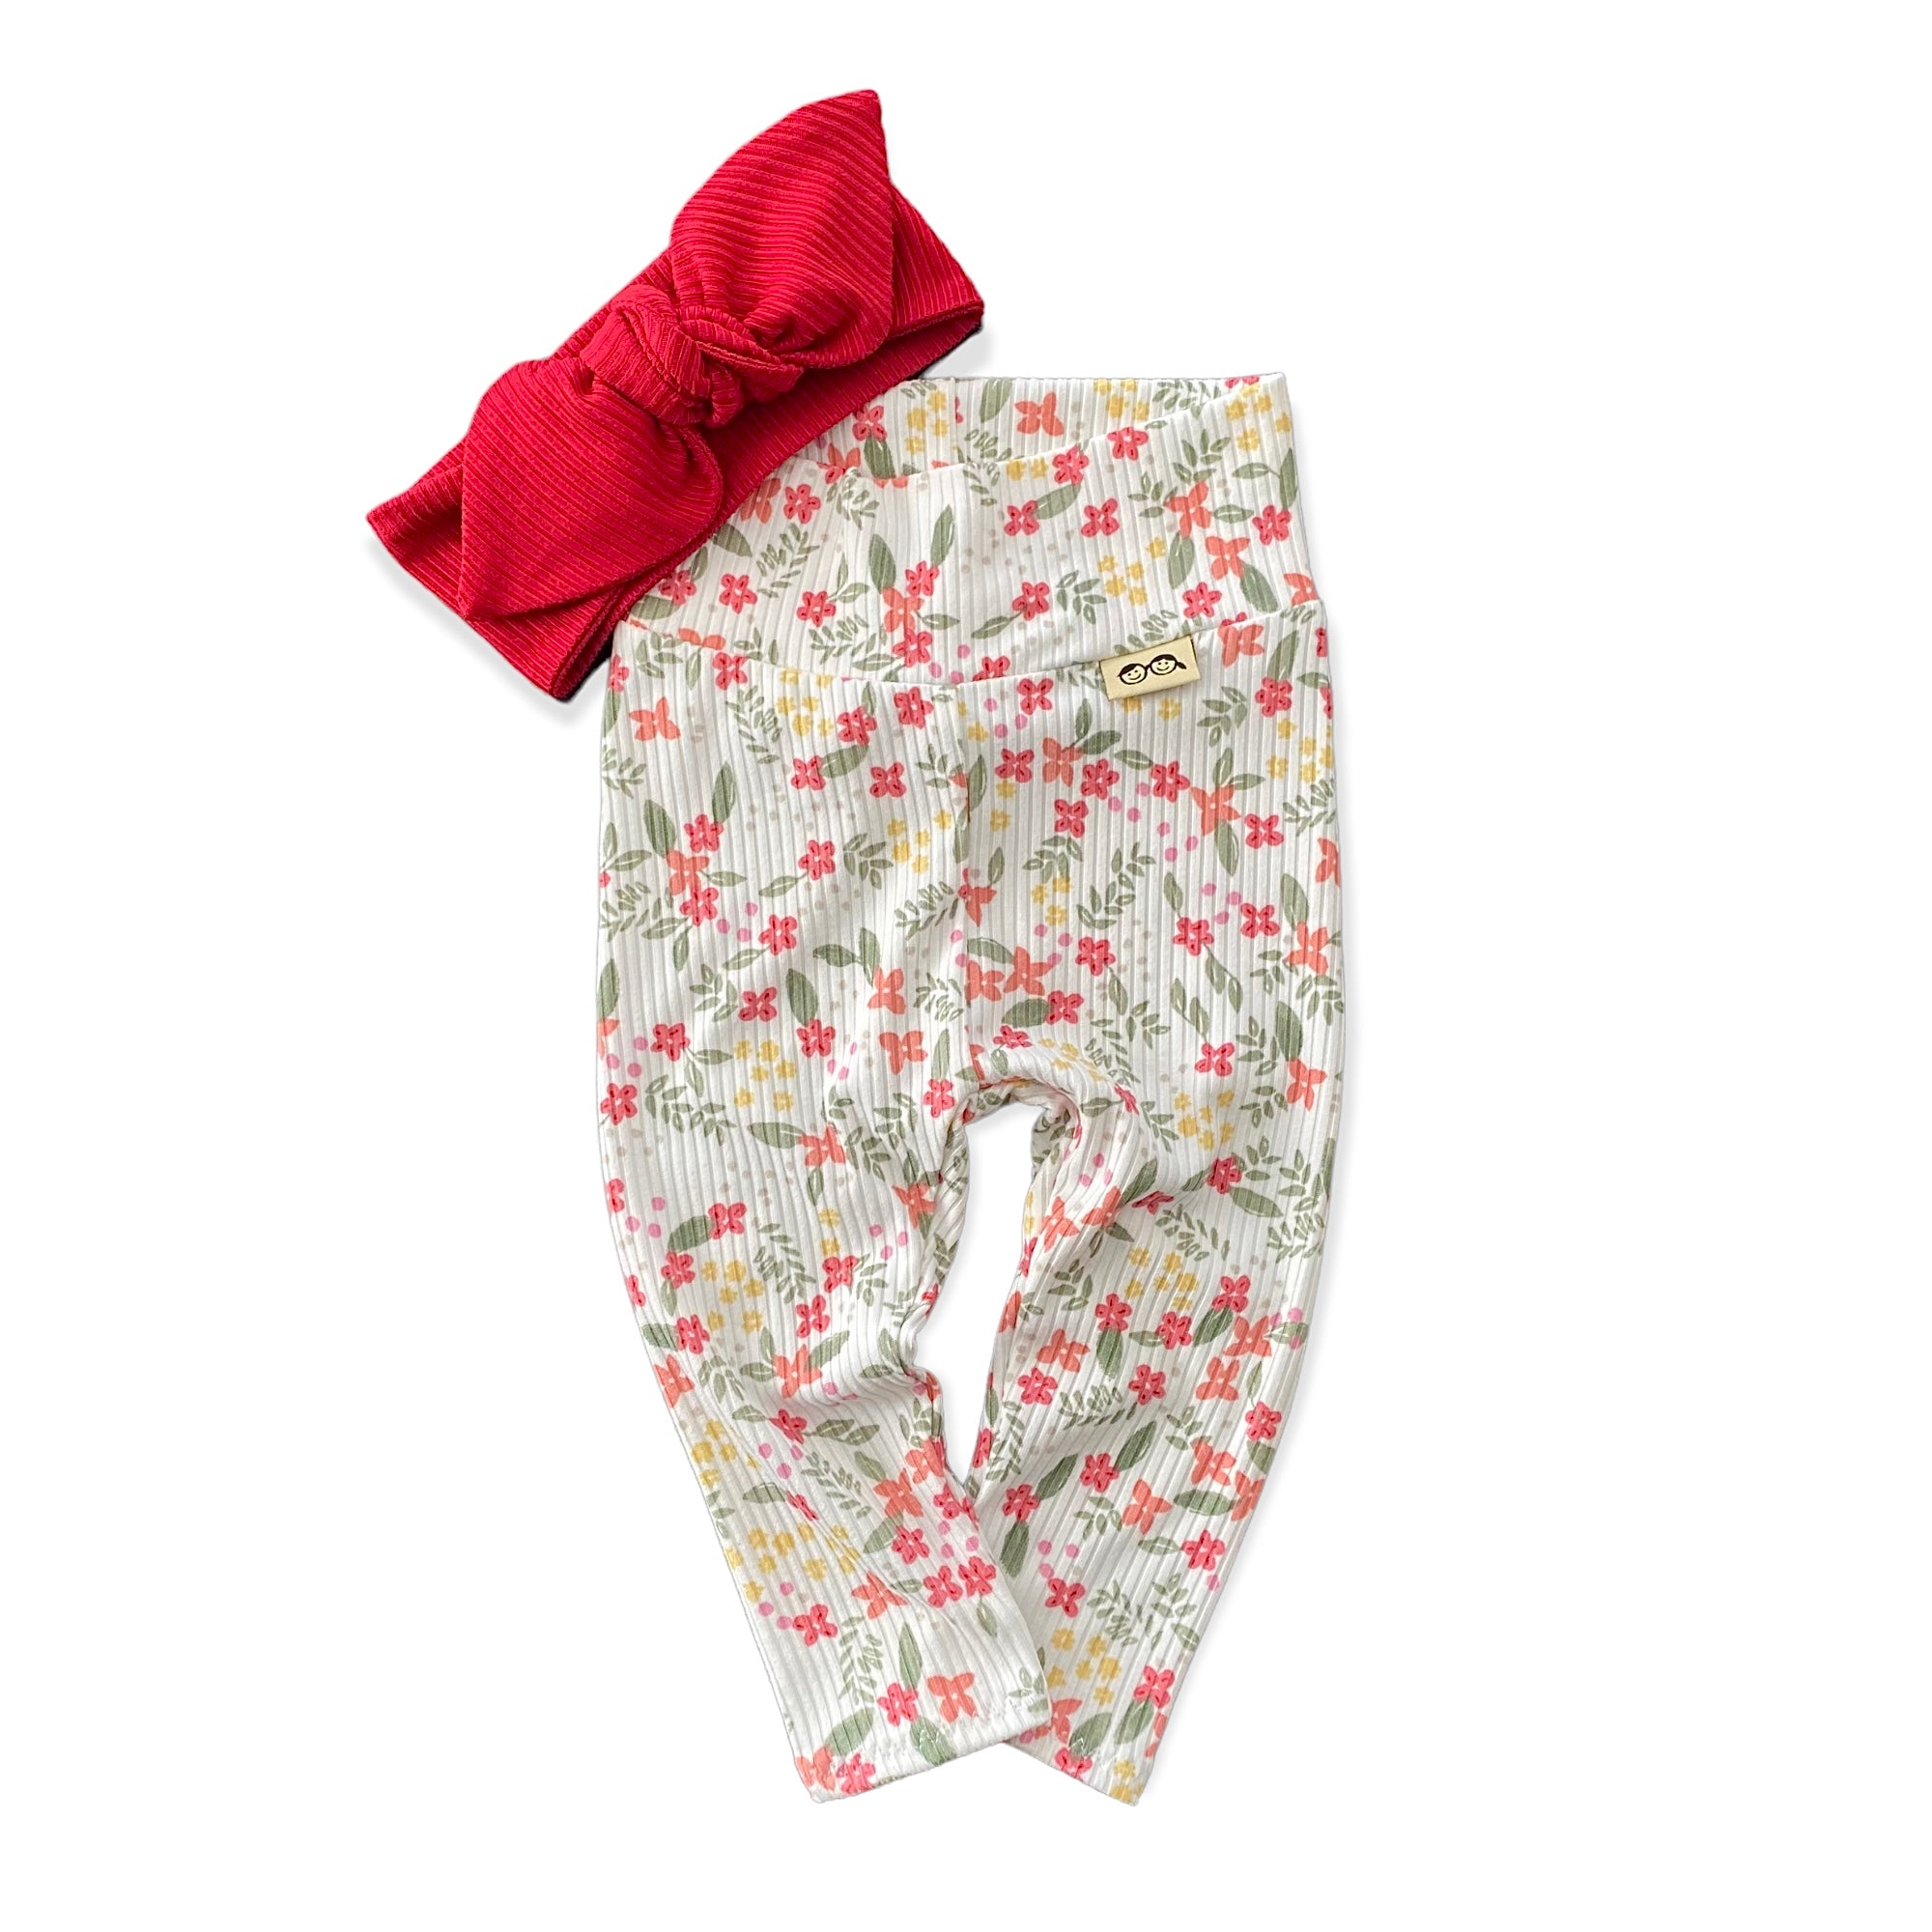 Colorful Dainty Flowers on White Rib Mix and Match Leggings with Red Headband